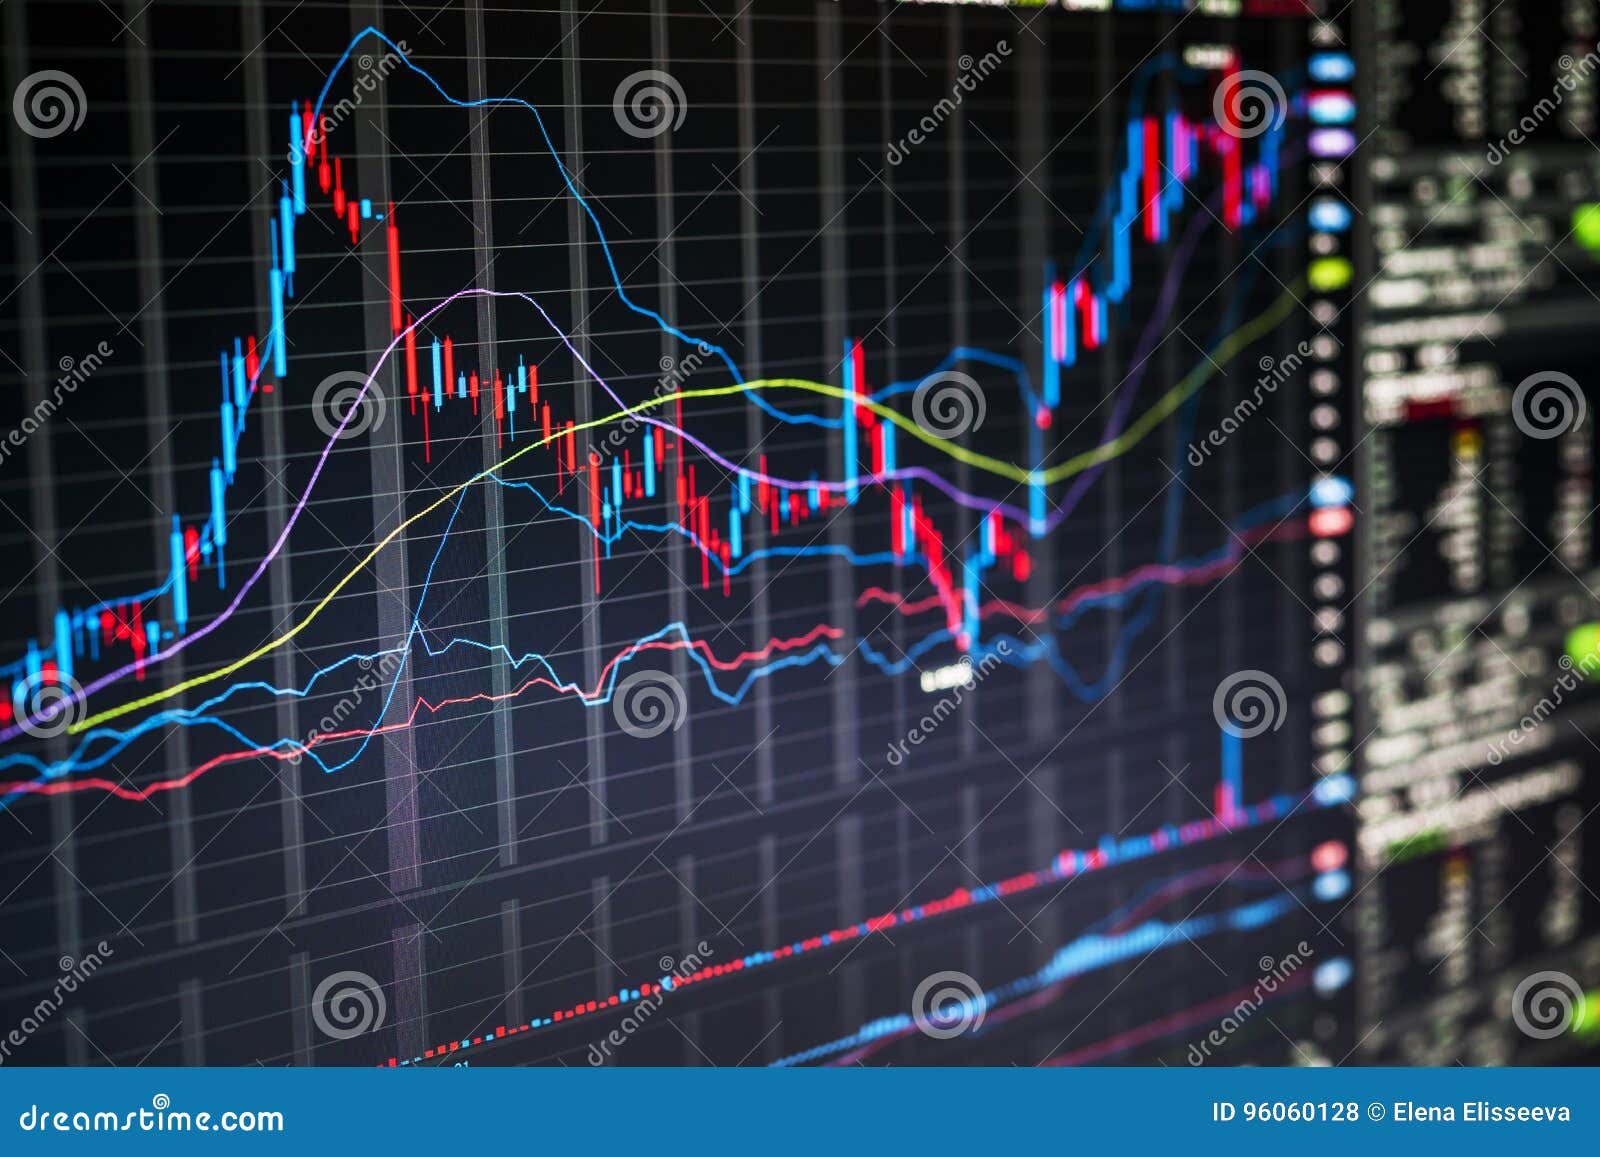 Free Trading Charts Online